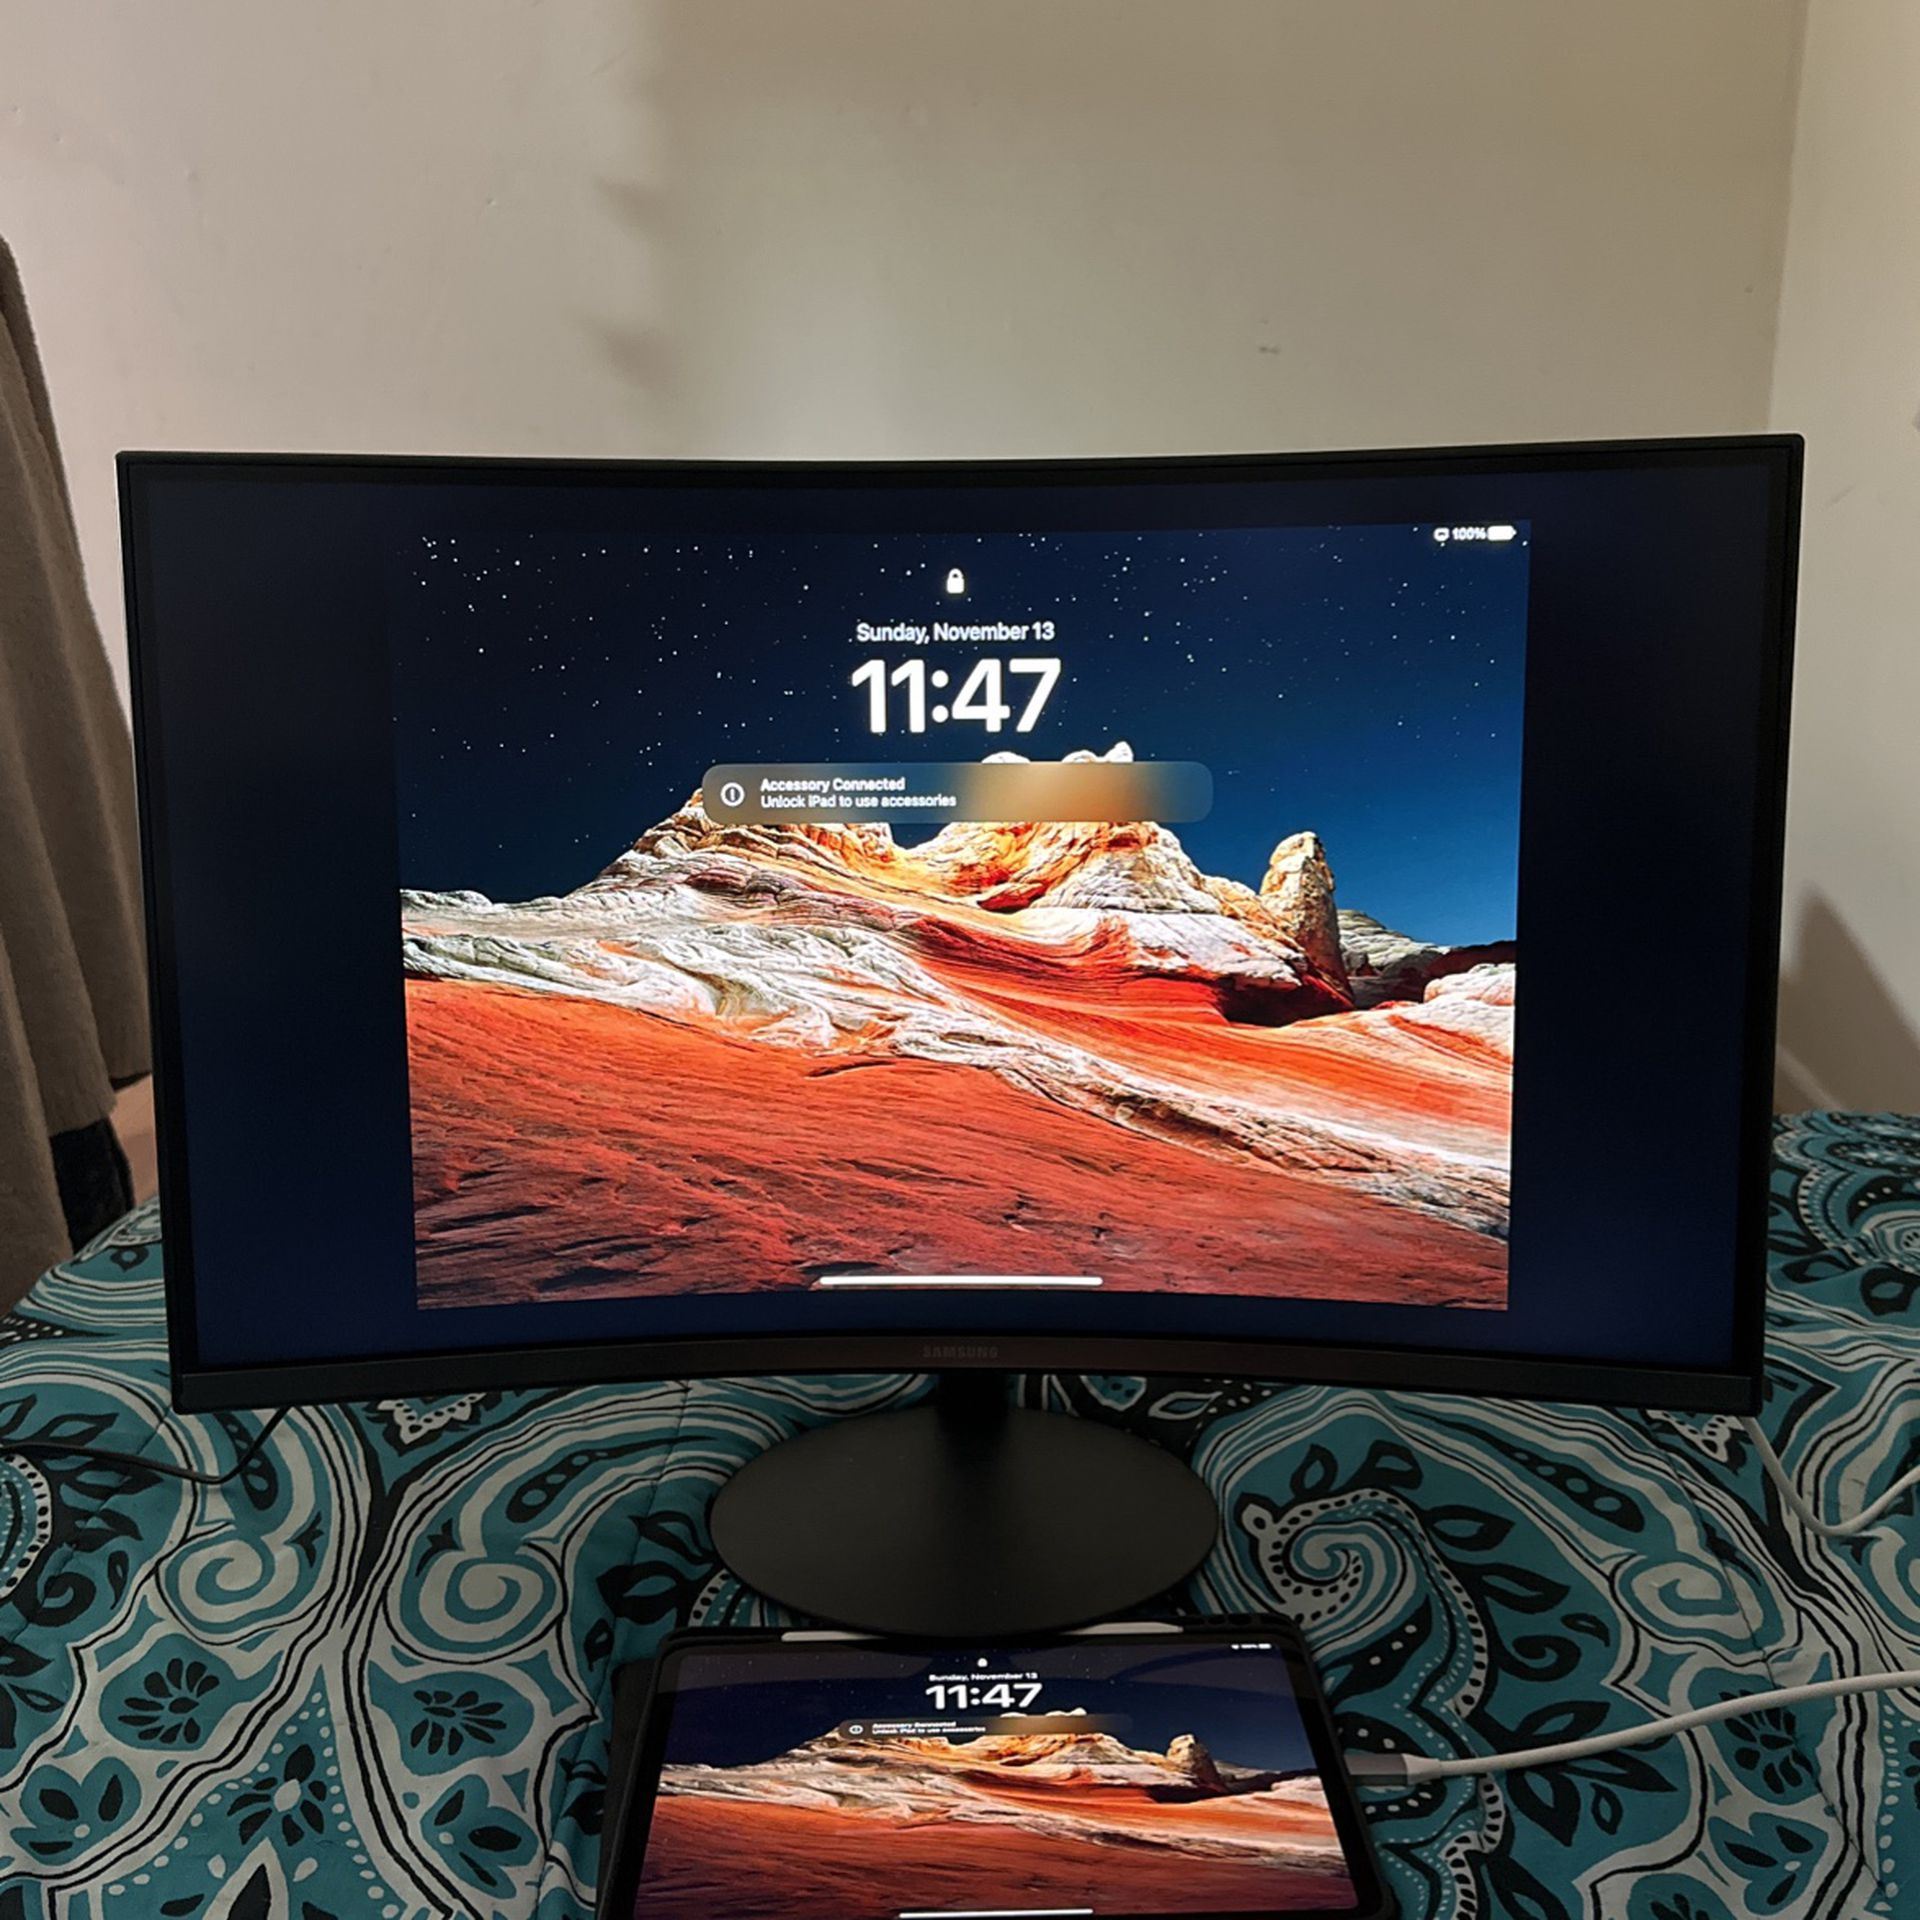 Samsung Curved Monitor 27”